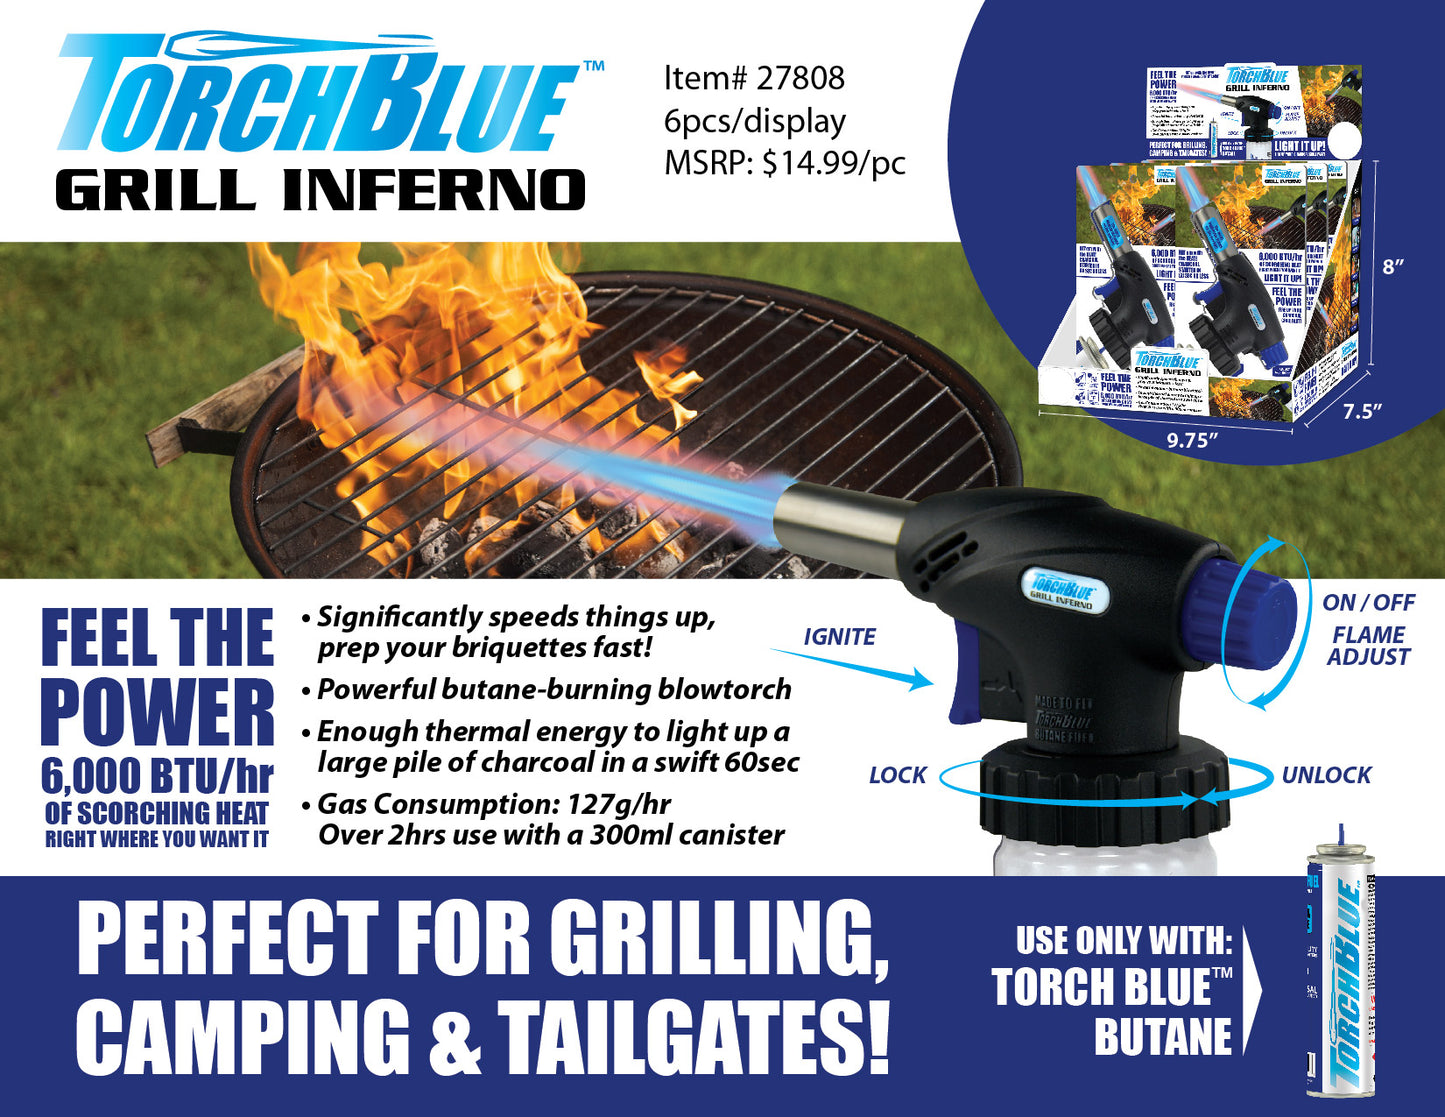 ITEM NUMBER 027808 TORCH BLUE GRILL INFERNO 6 PIECES PER DISPLAY